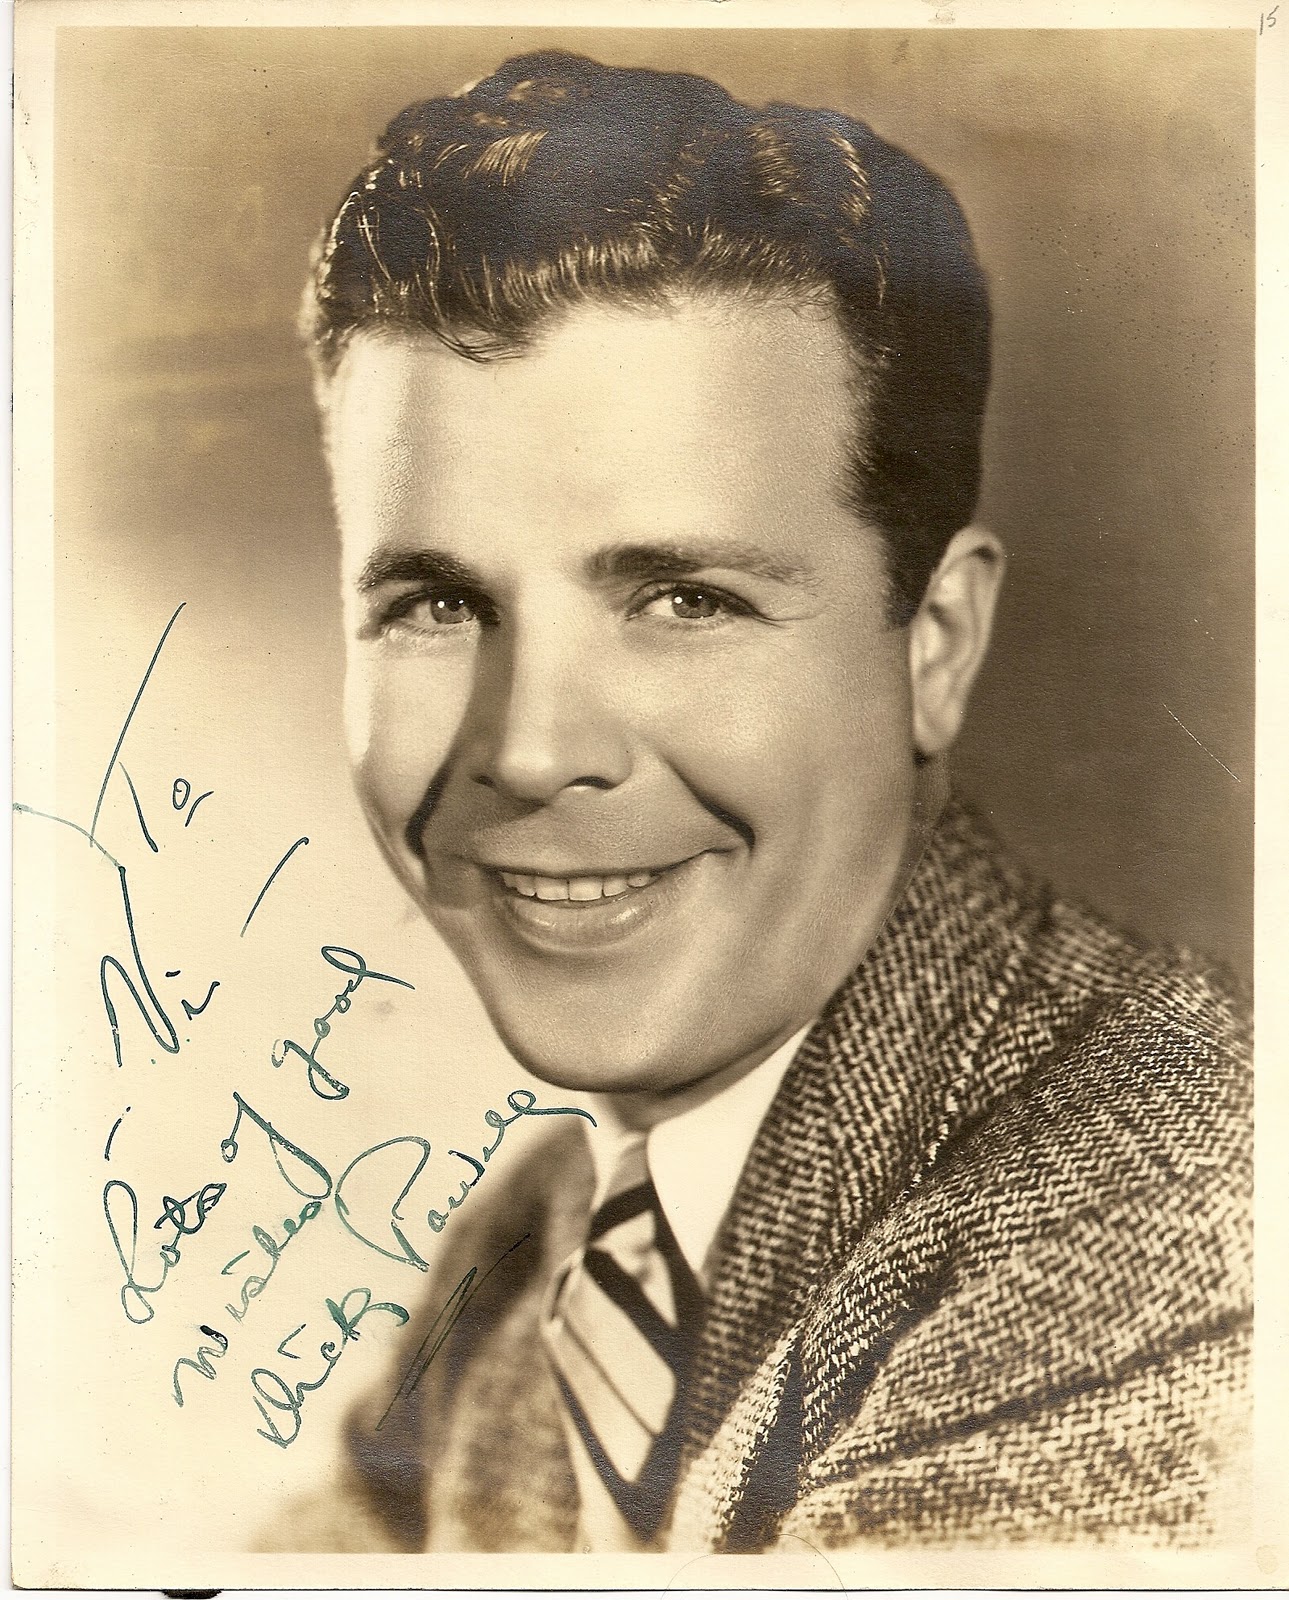 click to close - dick-powell-3